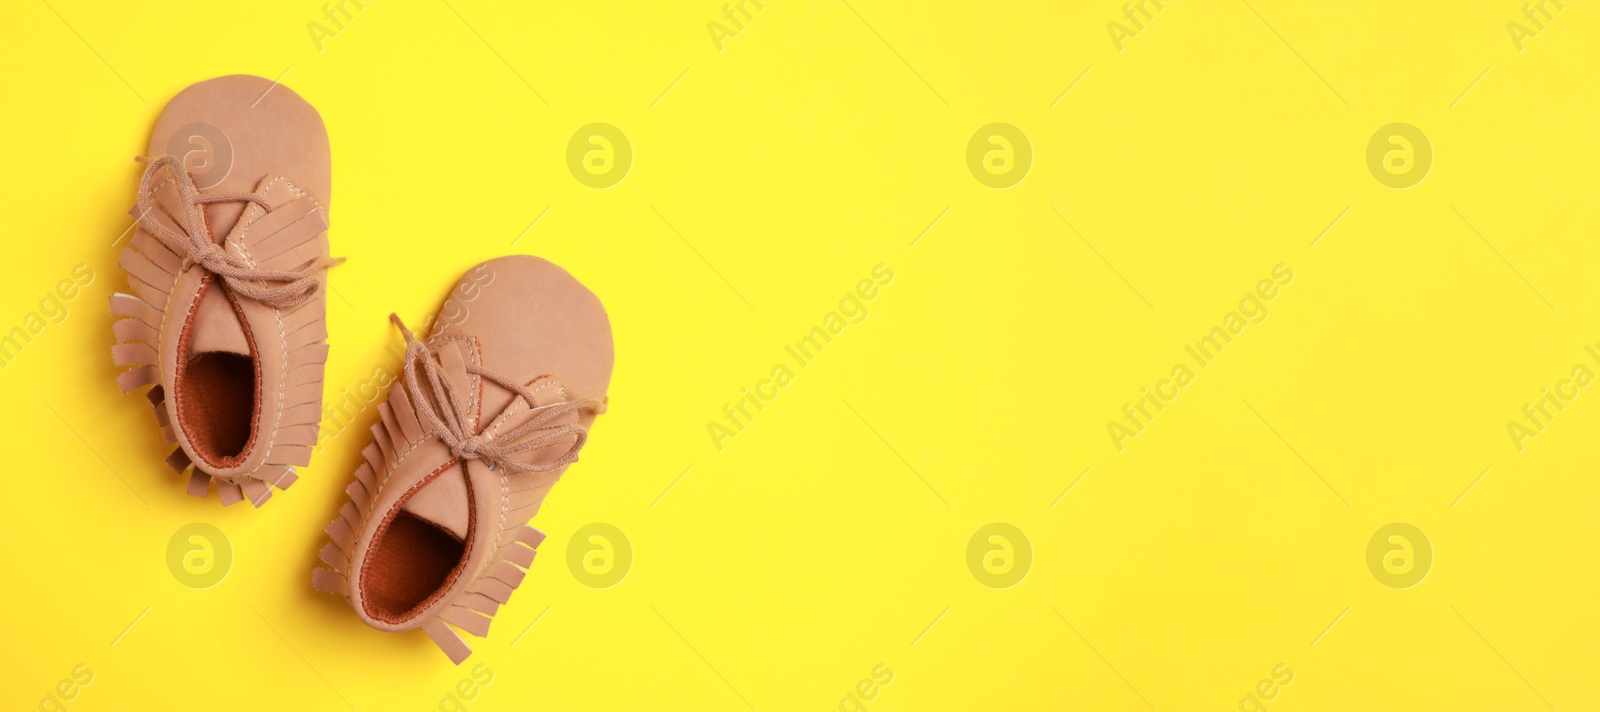 Image of Cute baby shoes on yellow background, top view. Banner design with space for text